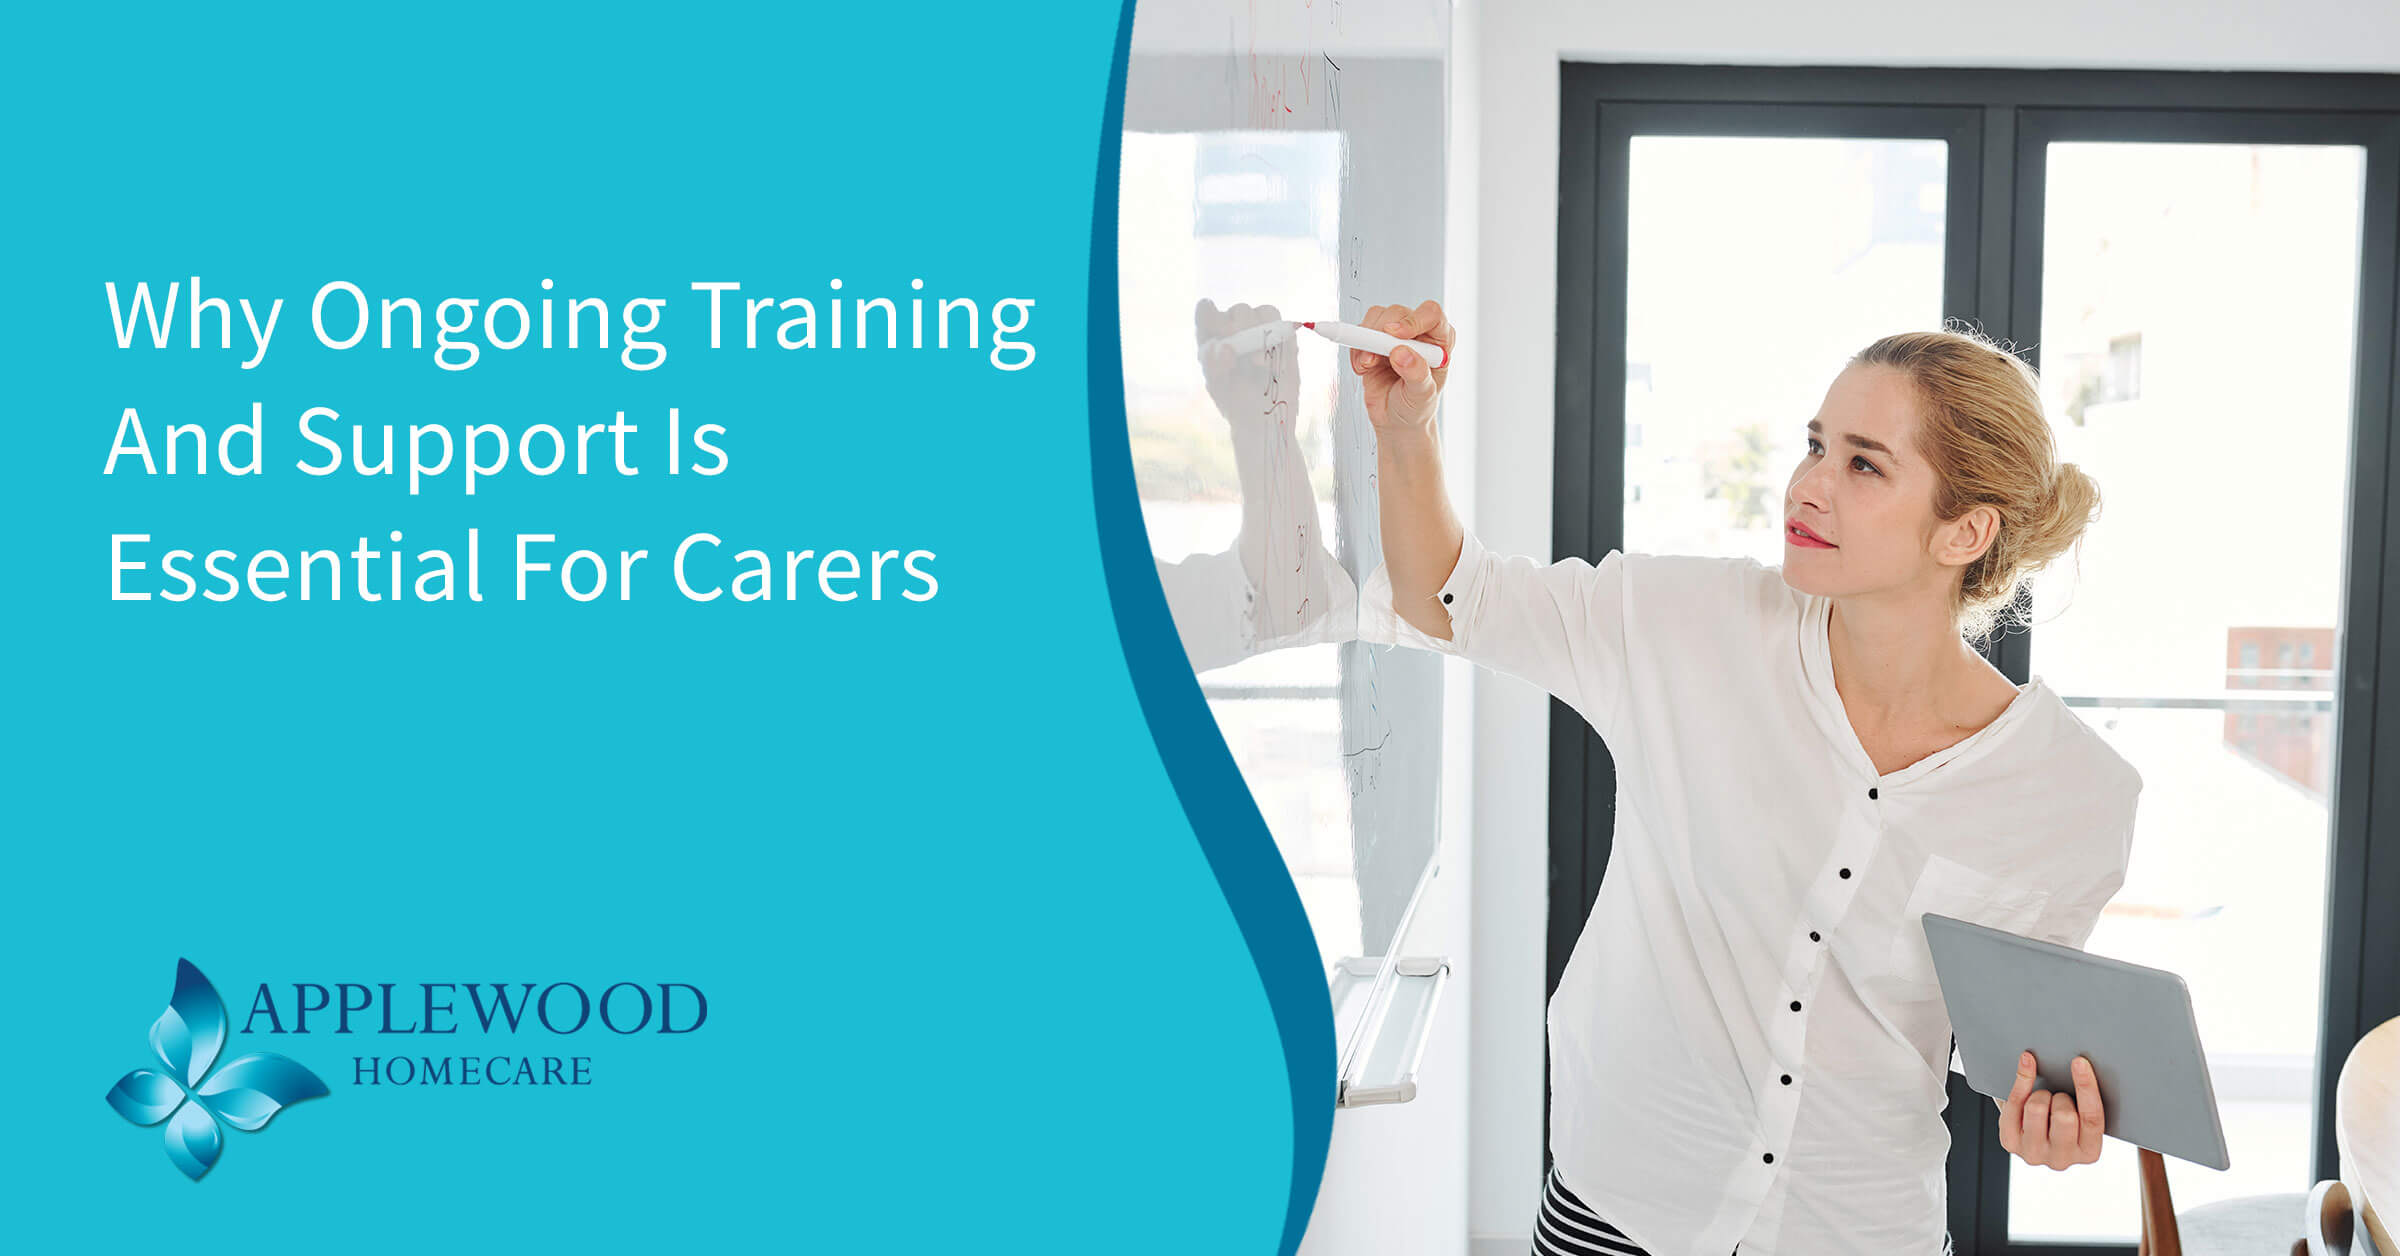 Why Ongoing Training and Support Is Essential For Carers